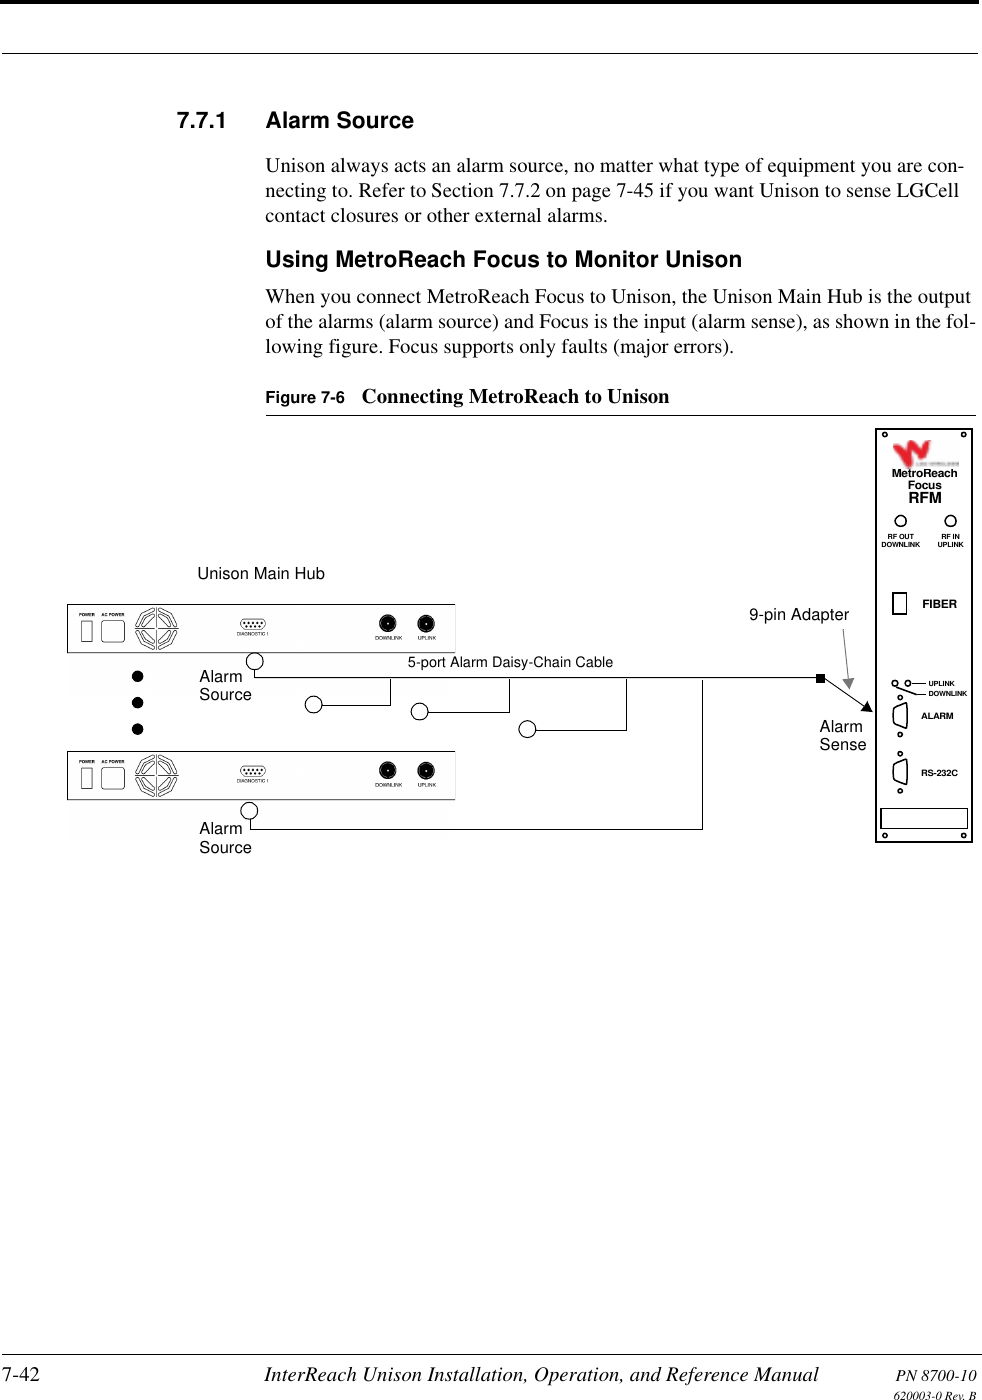 7-42 InterReach Unison Installation, Operation, and Reference Manual PN 8700-10620003-0 Rev. B7.7.1 Alarm SourceUnison always acts an alarm source, no matter what type of equipment you are con-necting to. Refer to Section 7.7.2 on page 7-45 if you want Unison to sense LGCell contact closures or other external alarms.Using MetroReach Focus to Monitor UnisonWhen you connect MetroReach Focus to Unison, the Unison Main Hub is the output of the alarms (alarm source) and Focus is the input (alarm sense), as shown in the fol-lowing figure. Focus supports only faults (major errors).Figure 7-6 Connecting MetroReach to UnisonUnison Main HubRF OUTDOWNLINK RF INUPLINKFIBERUPLINKDOWNLINKALARMRS-232CMetroReachFocusRFMAlarmSenseAlarmSourceAlarmSource5-port Alarm Daisy-Chain Cable9-pin Adapter